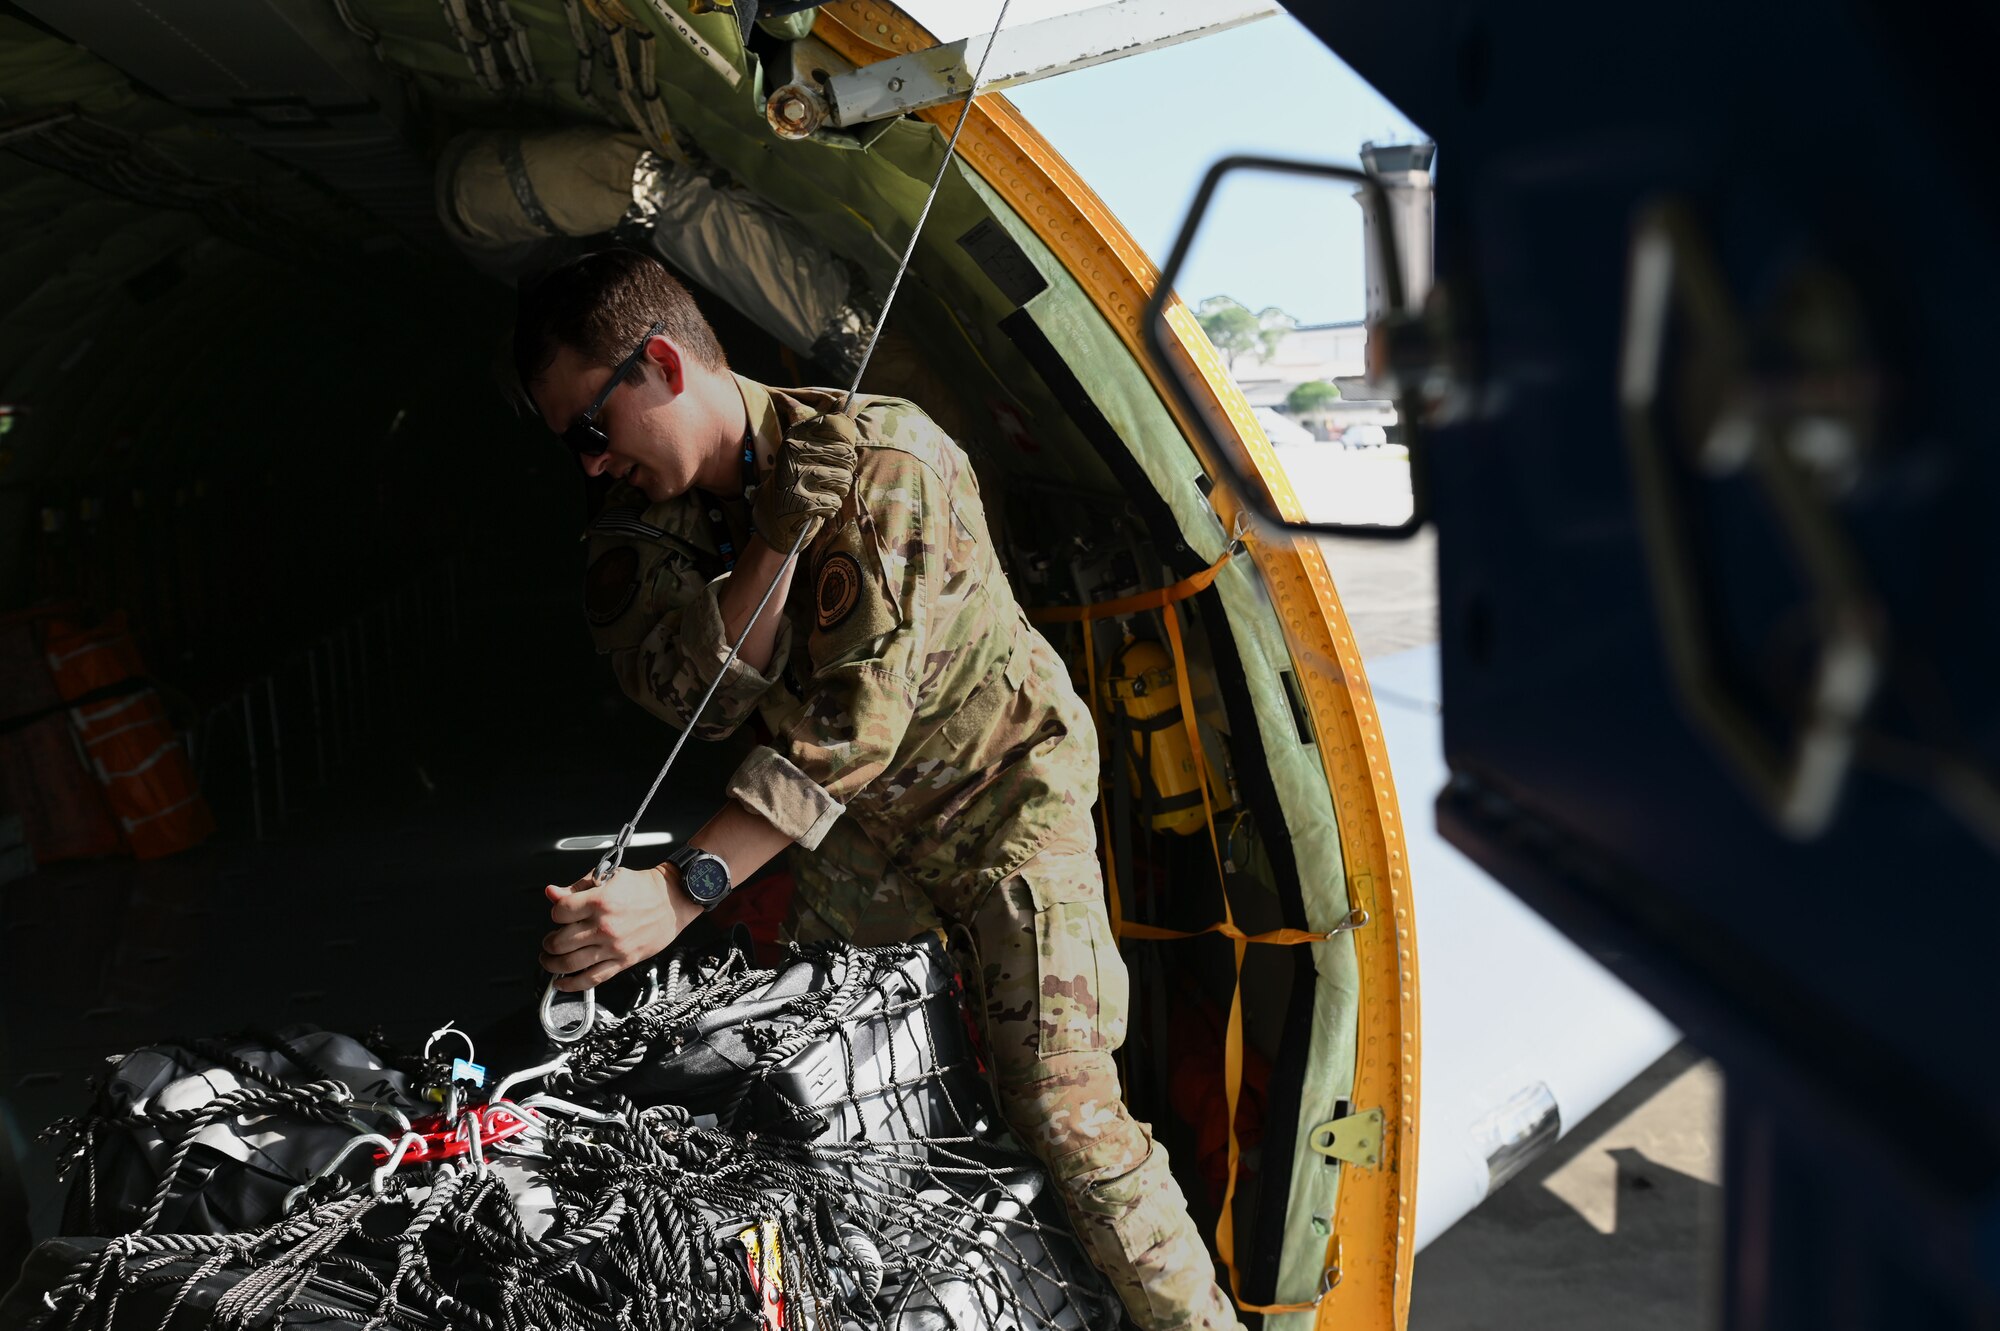 U.S. Air Force Tech. Sgt. Nicholas Sowder, 509th Weapons Squadron Advanced Instructor Training cadre and inflight refueling specialist, prepares to unload cargo using the Pack and Transport Reloader crane (PATR) prototype at Hurlburt Field, Florida, May 6, 2023. Airmen from the 509th WPS tested a new prototype PATR crane during an integration training at a special operations forces exercise at Hurlburt Field. (U.S. Air Force photo by Staff Sgt. Lawrence Sena)